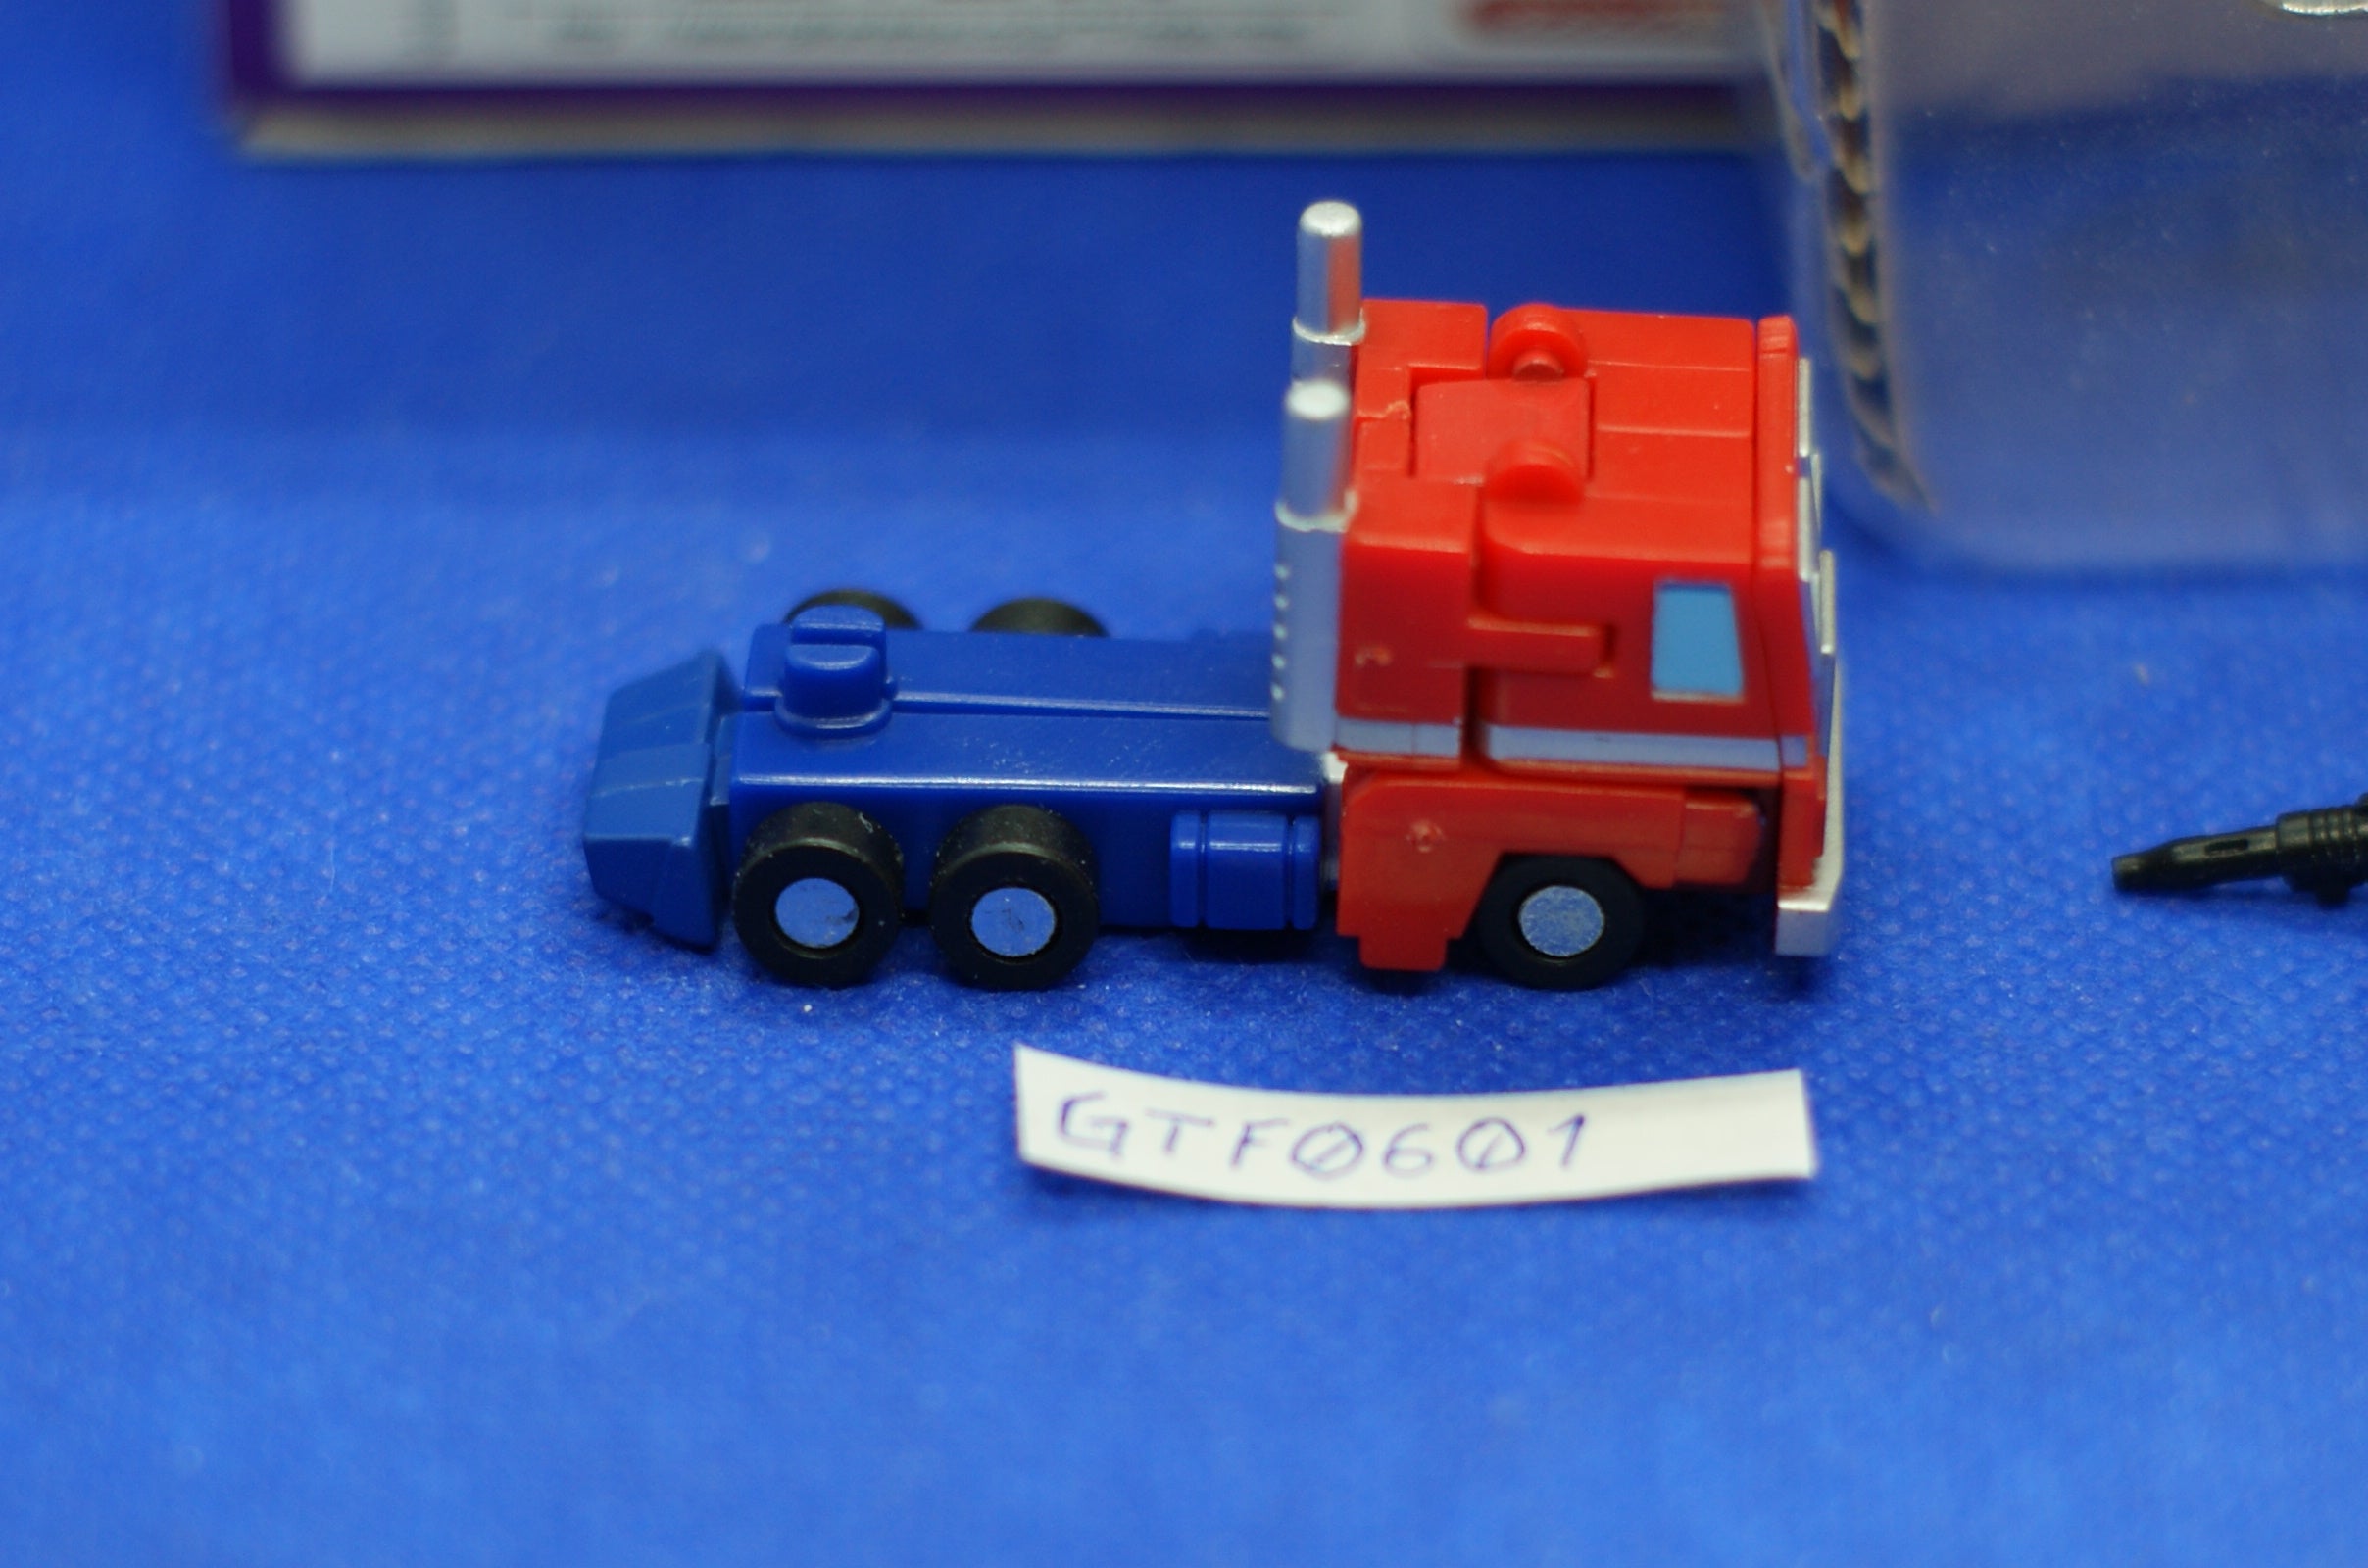 Transformers - Autobot: Optimus Prime (WST) (GTF0601) | All Aboard Games